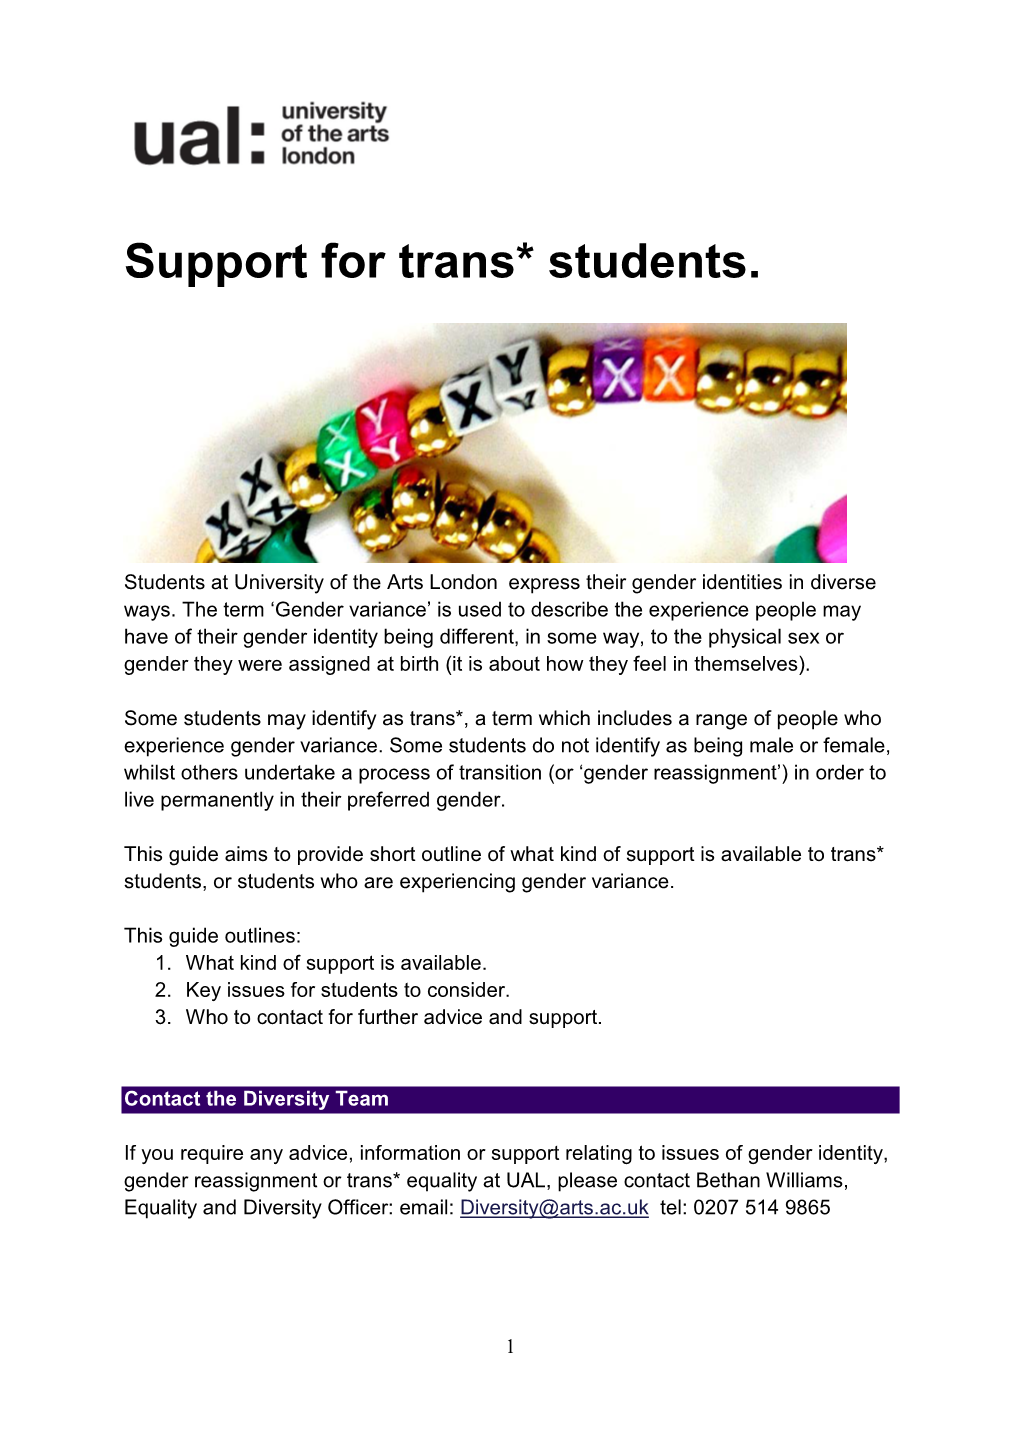 Supporting Trans Students